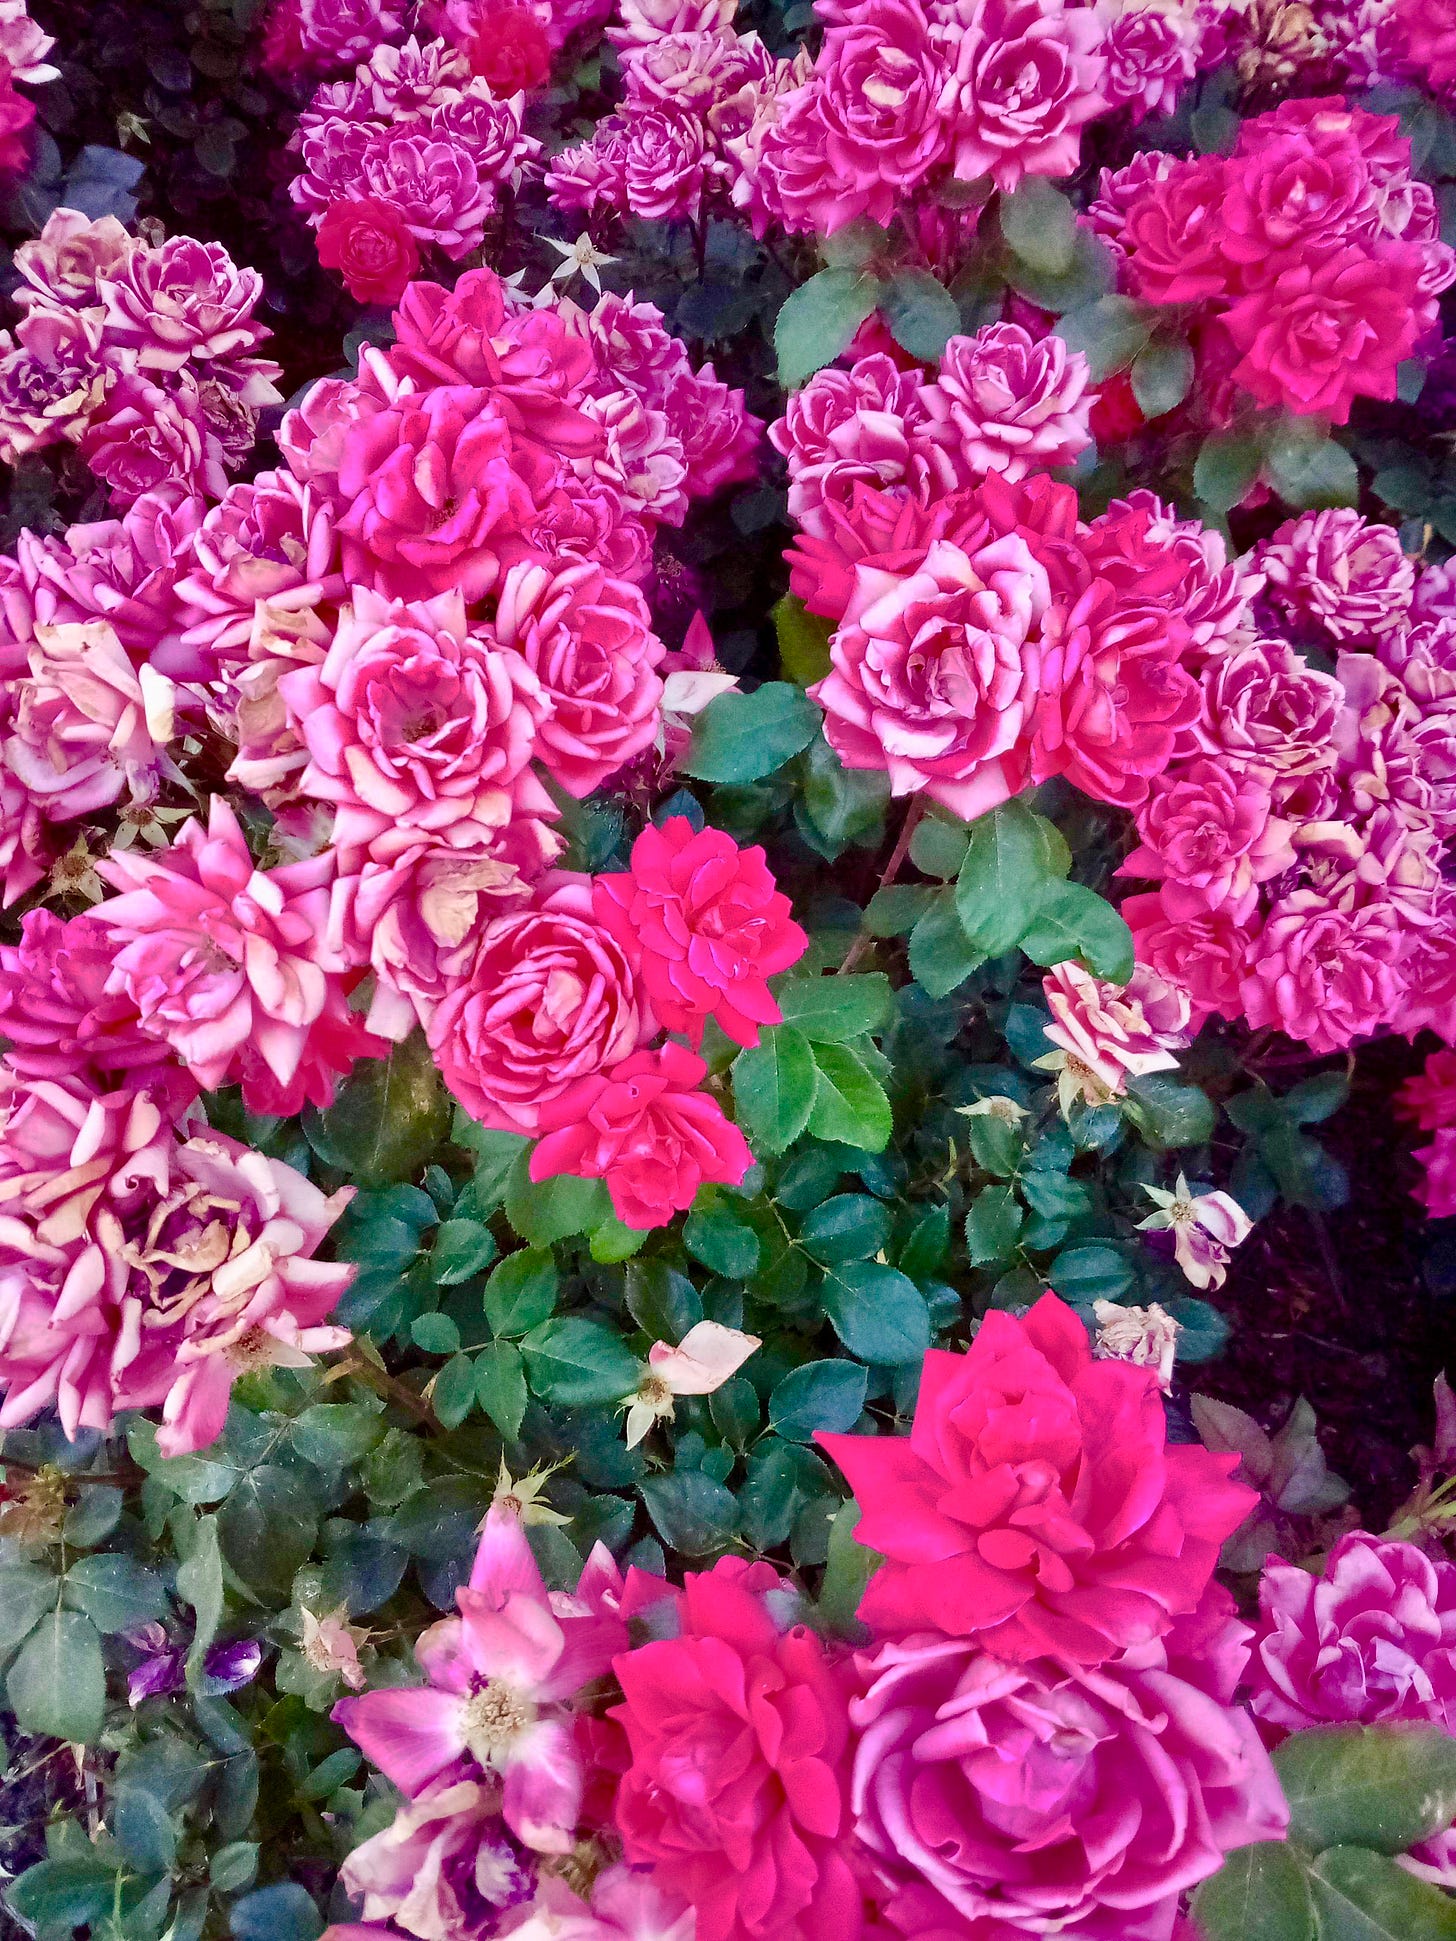 Magenta roses, some fading